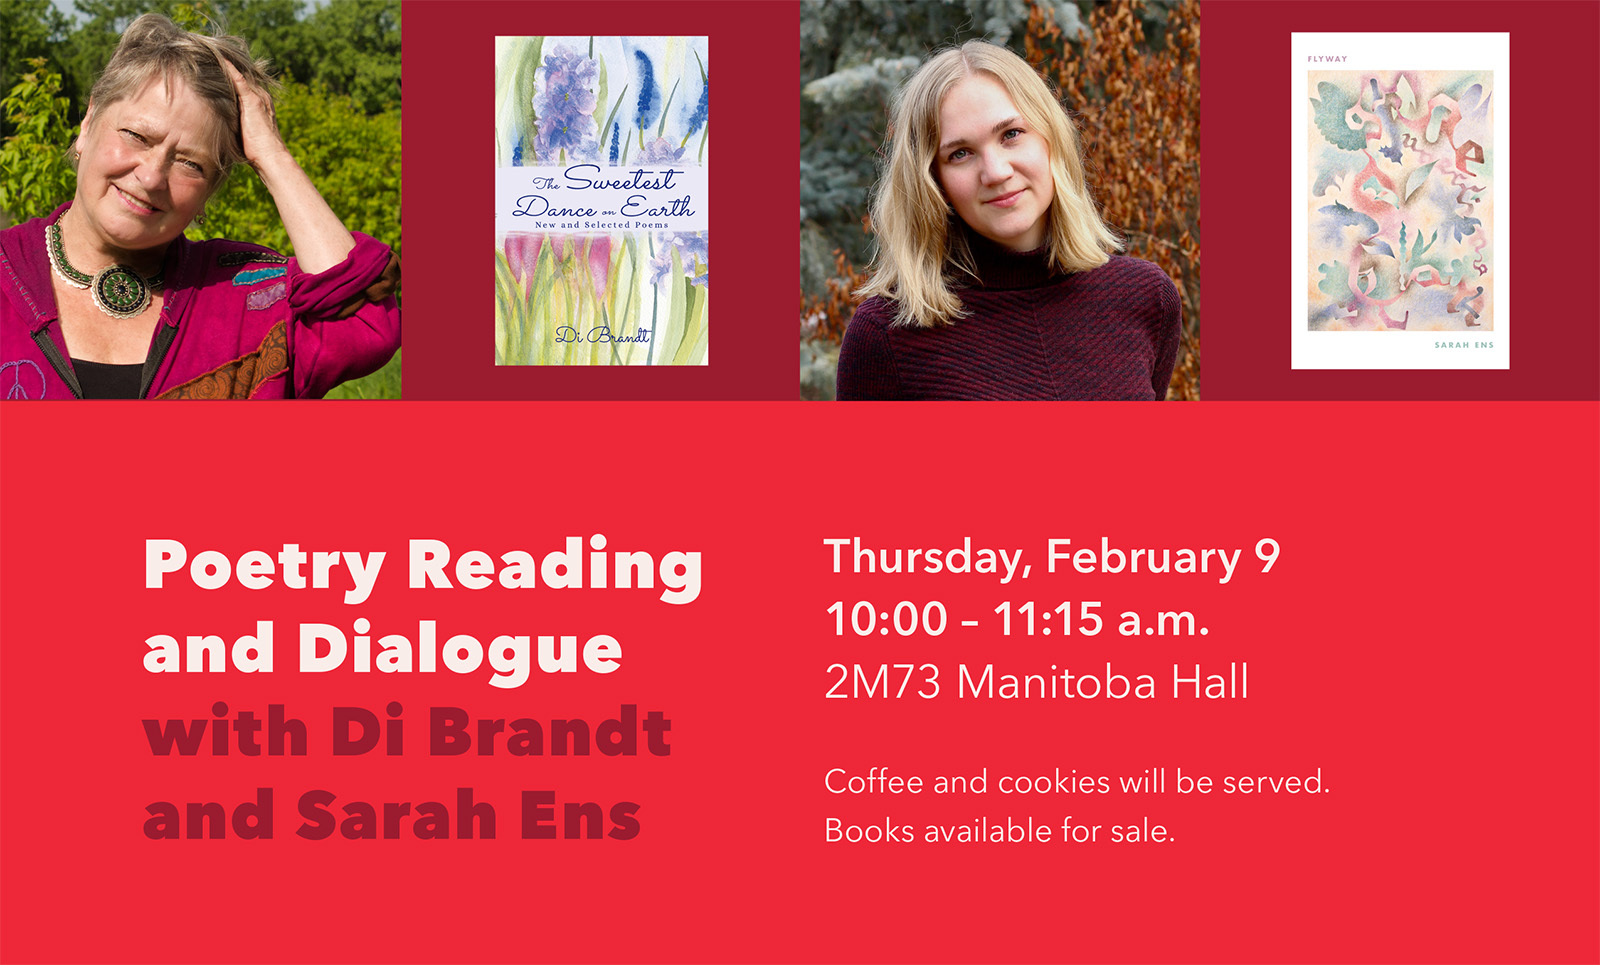 Poetry Reading and Dialogue with Di Brandt and Sarah Ens. Thursday, February 9, 10 a.m., 2M73 Manitoba Hall